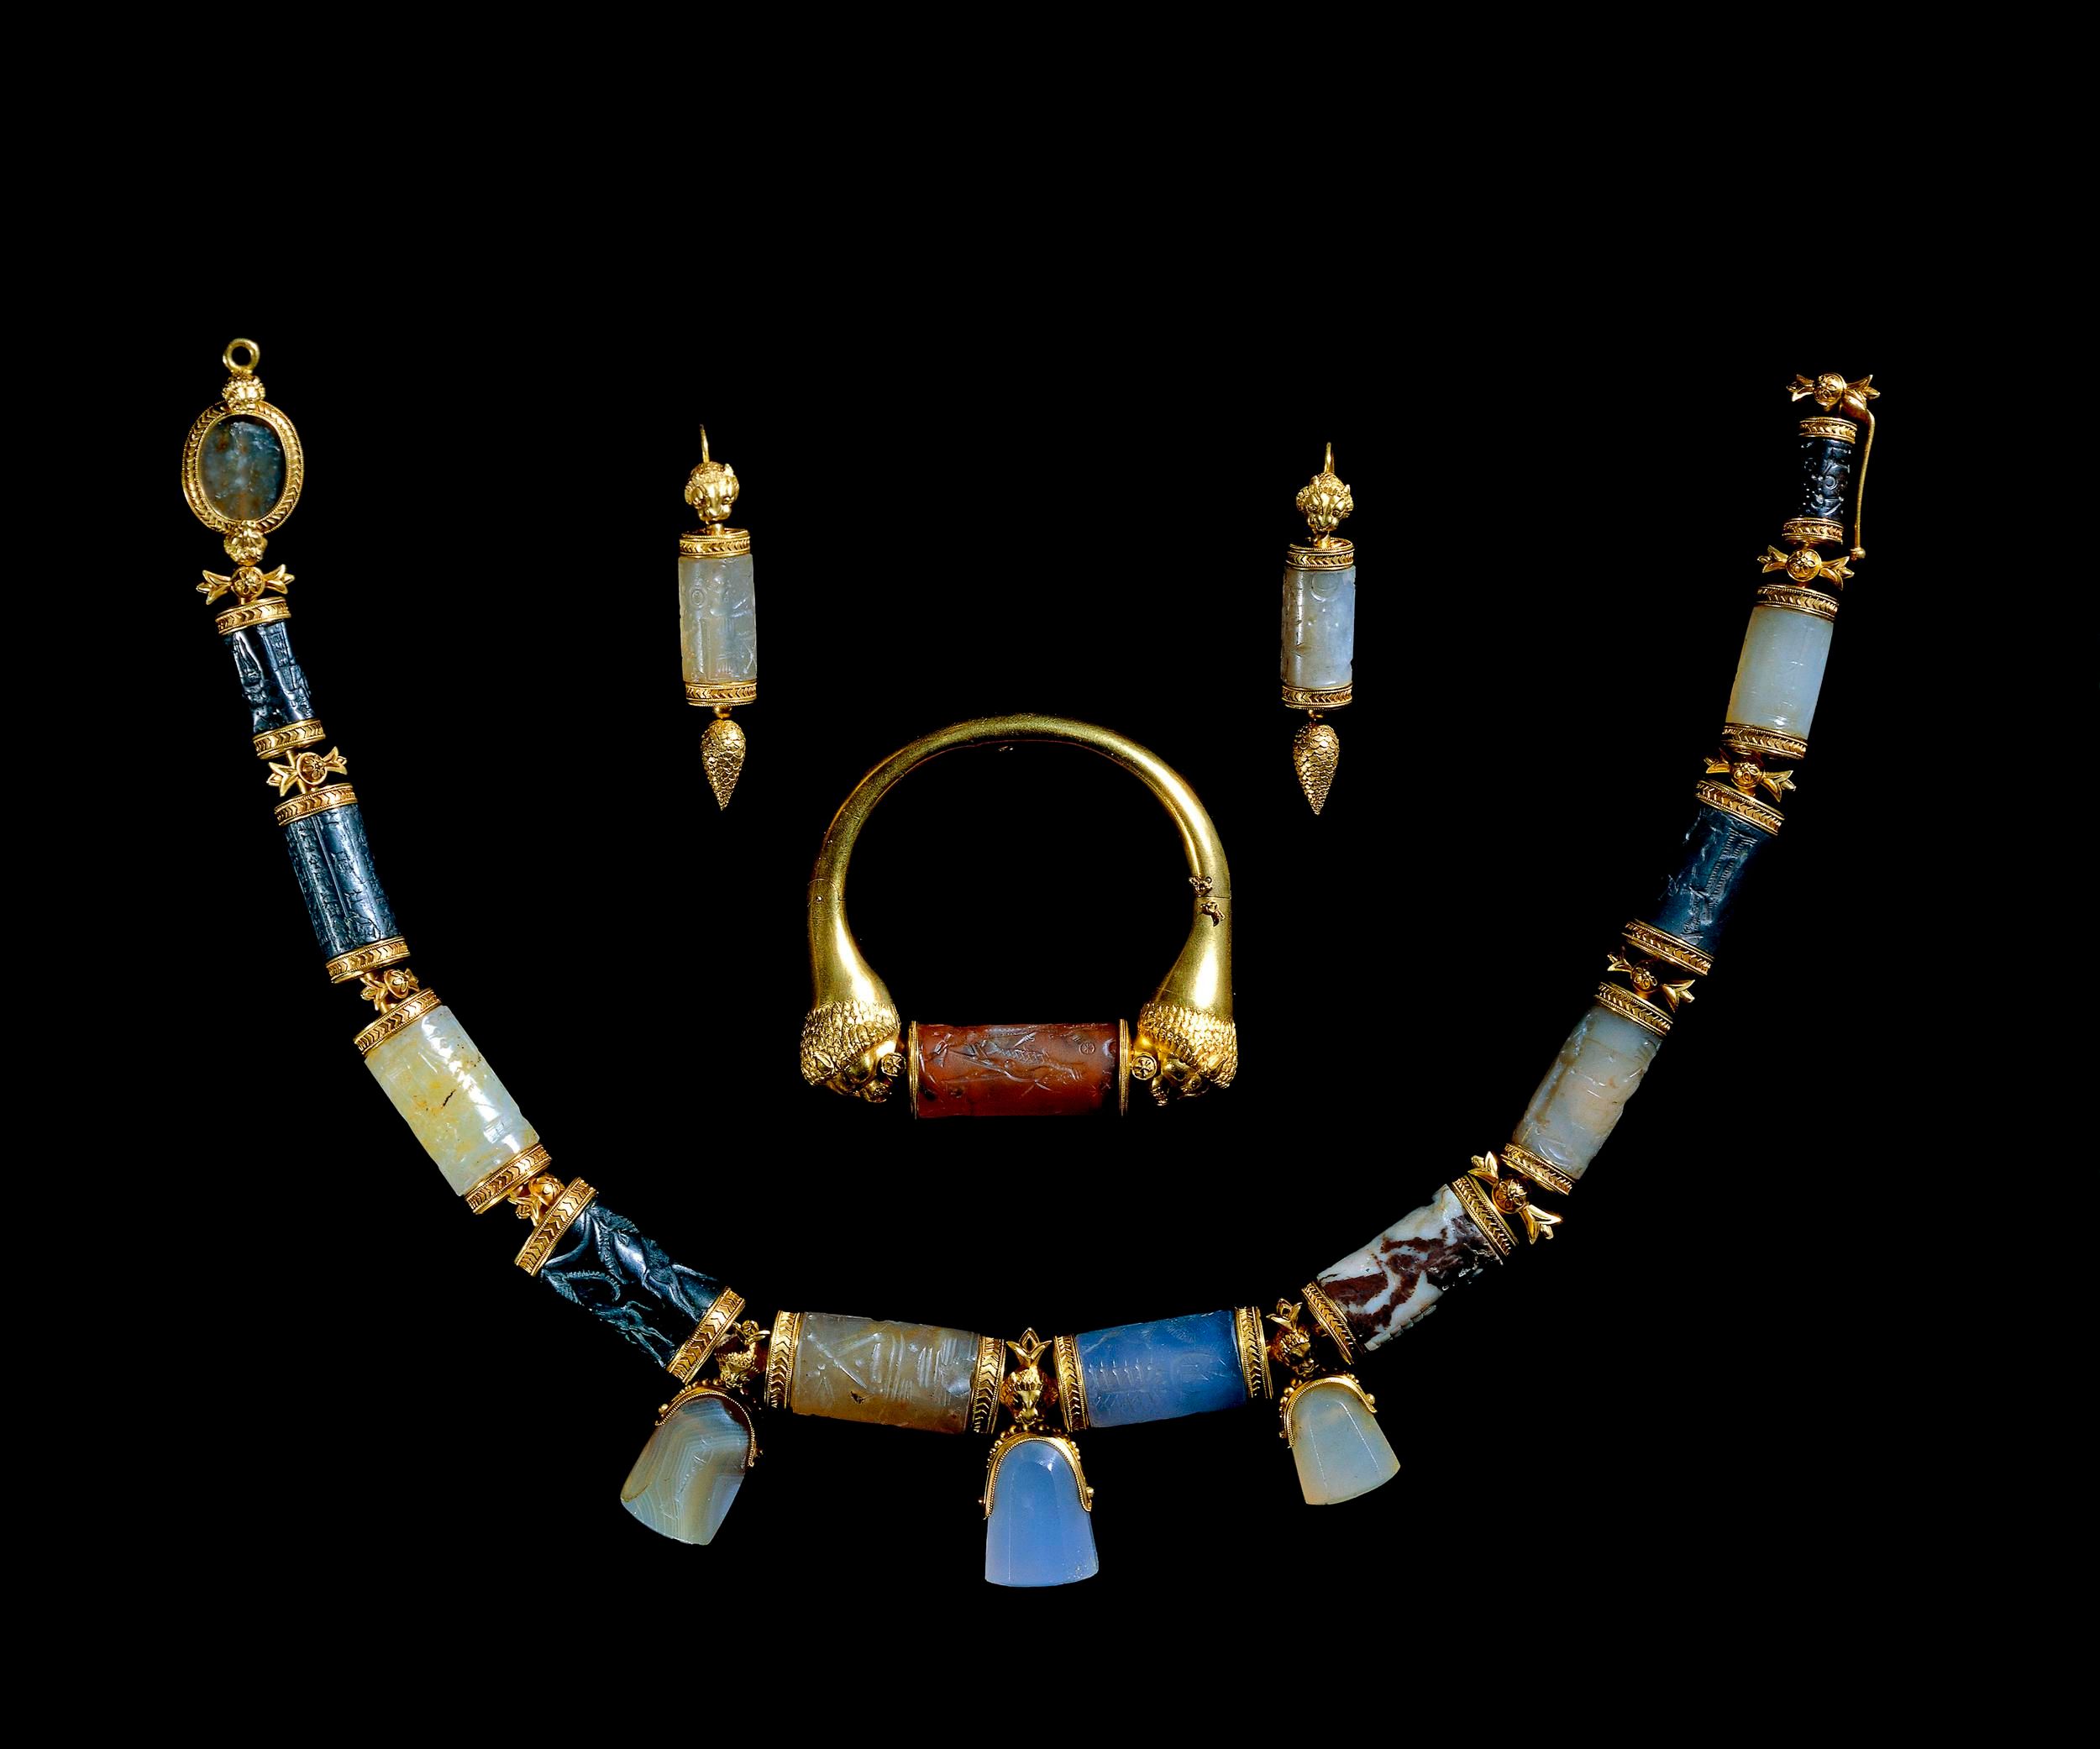 Lady Layard's jewelry, created in 1869. The British Museum. 